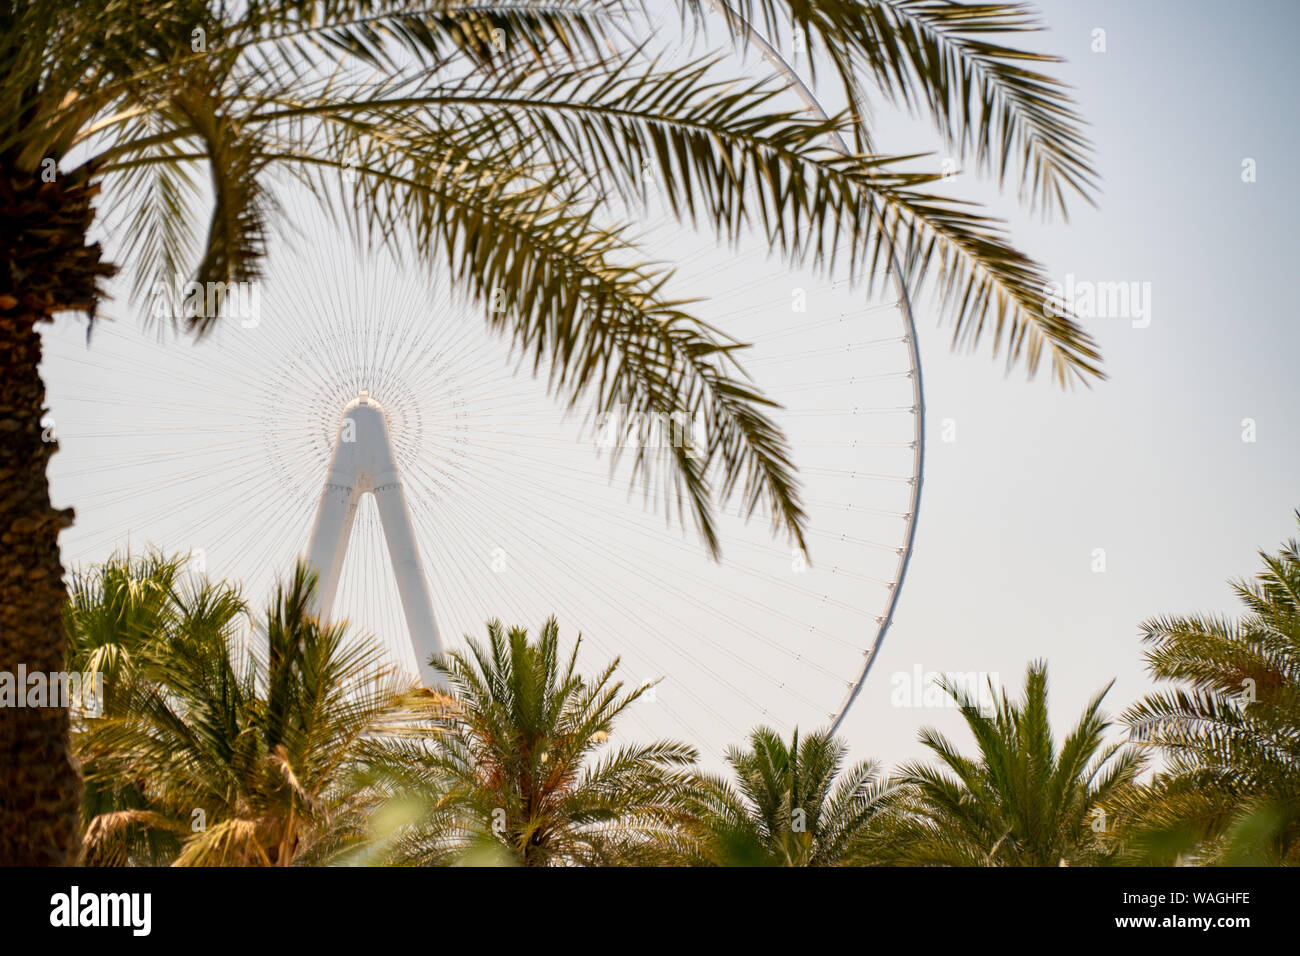 Dubai Eye ferris wheel on Bluewaters Island viewed from Jumeirah Beach Residence between palm trees on a sunny clear day Stock Photo